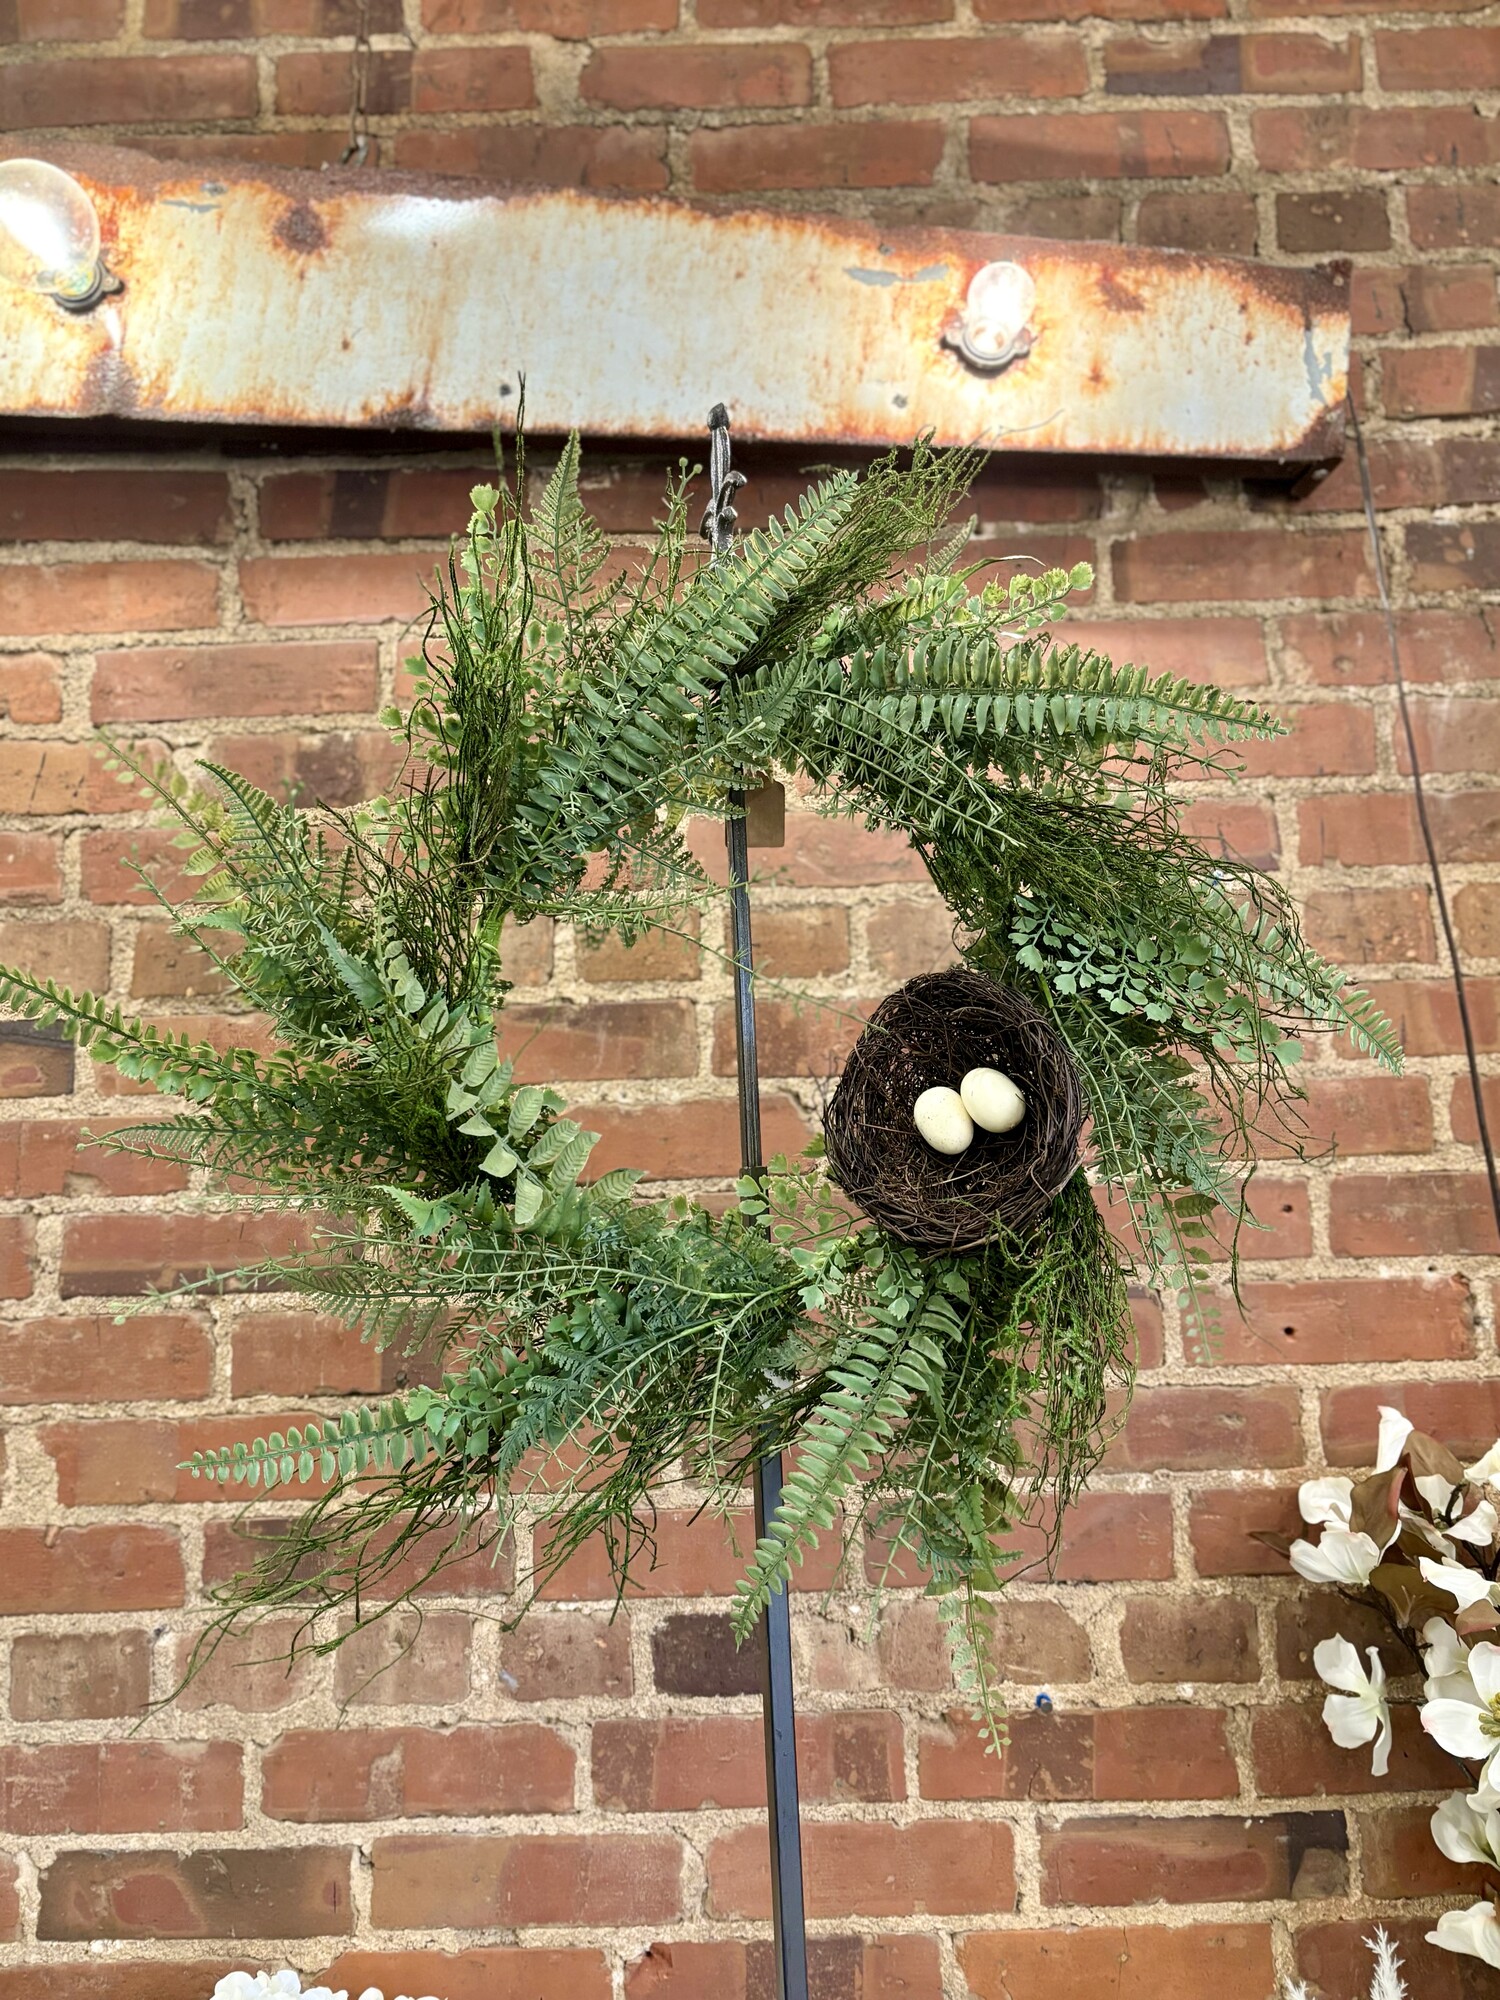 The Mossy Fern Wreath is a beautiful green wreath with a natural base. The wreath is filled wih rustic moss and light green fern stems, complete with a twig nest filled with a pair of cream colored eggs. This wreath brings a whimsical, woodsy touch to your home during the spring.
Wreath measures 10.5 inner diameter and approx 24 to 26 inches outer diameter